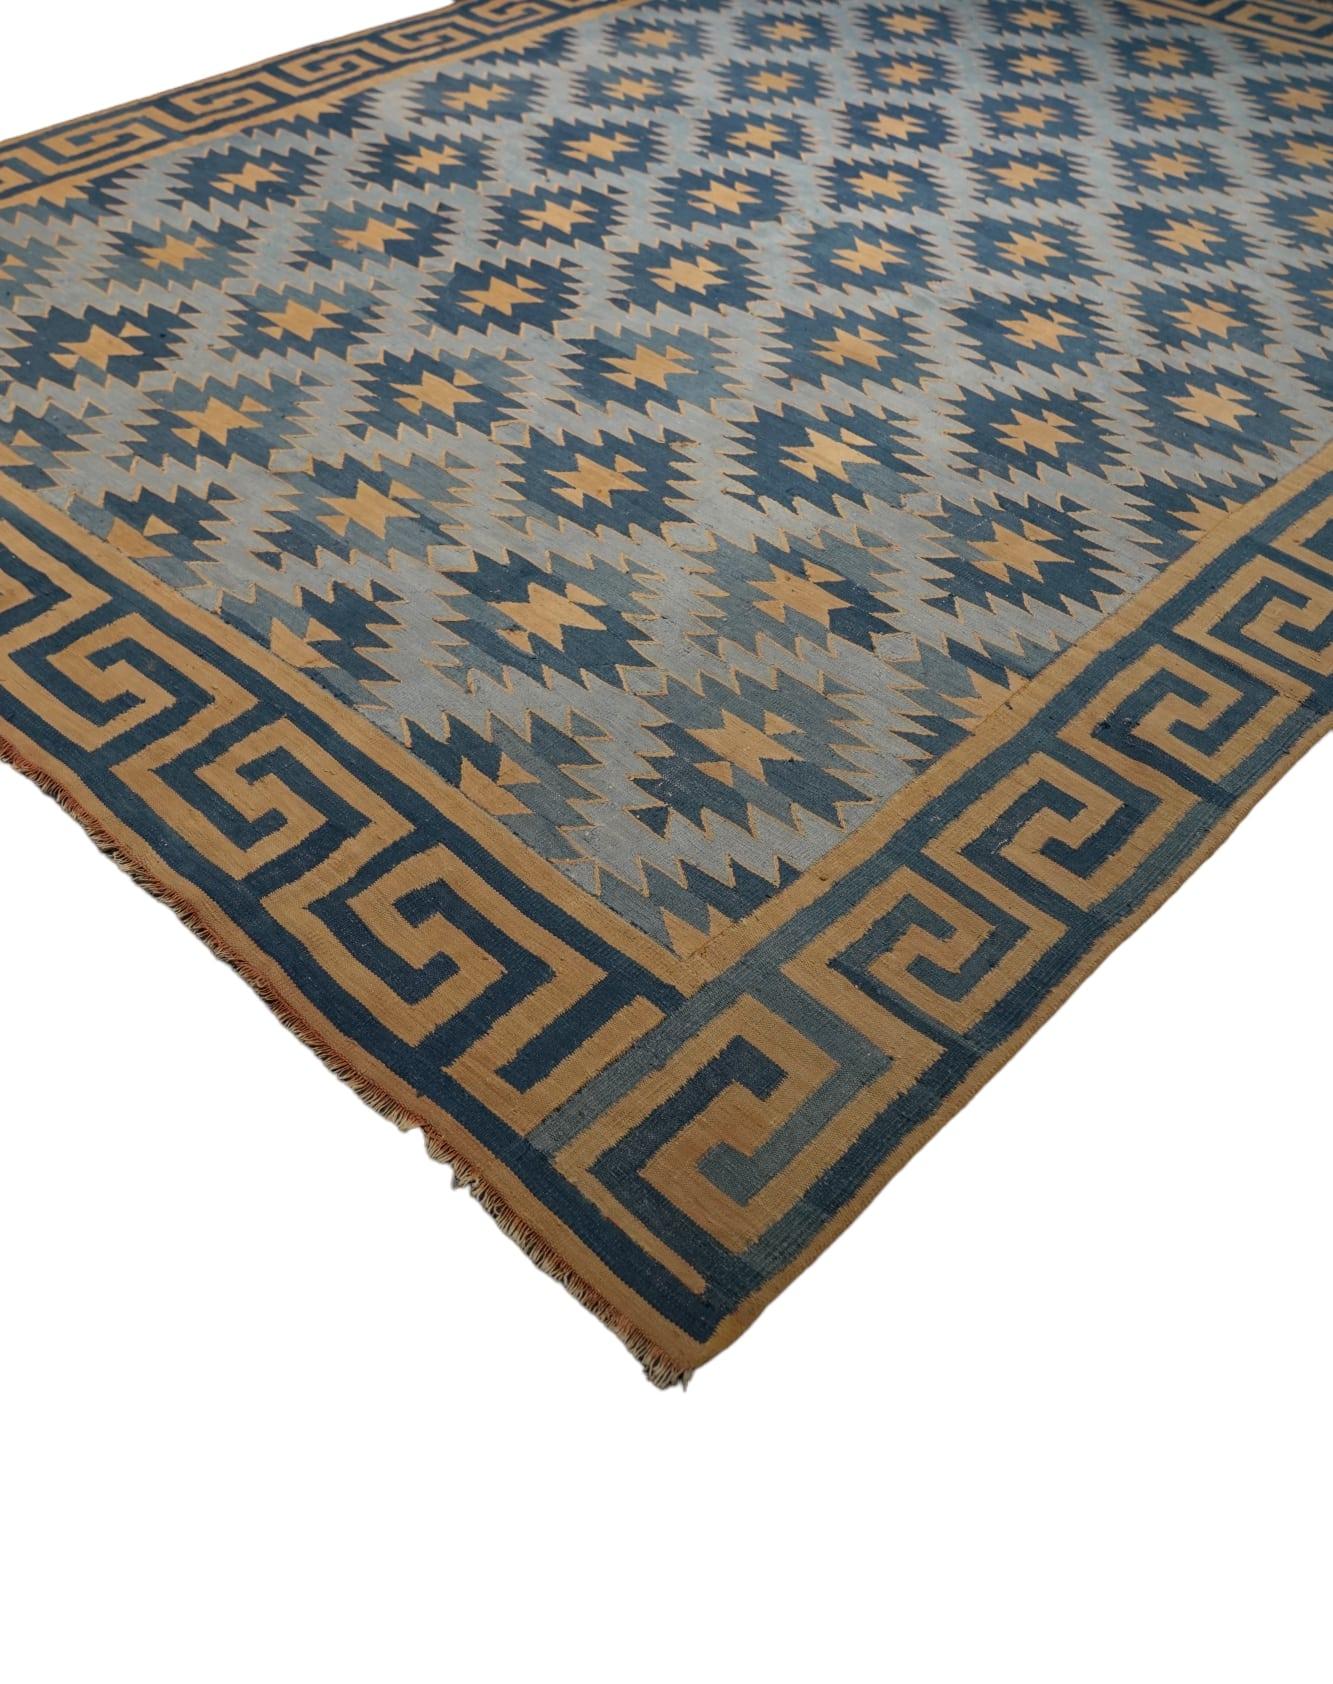 Indian Vintage Dhurrie Rug in Blue, with Geometric Patterns, from Rug & Kilim For Sale